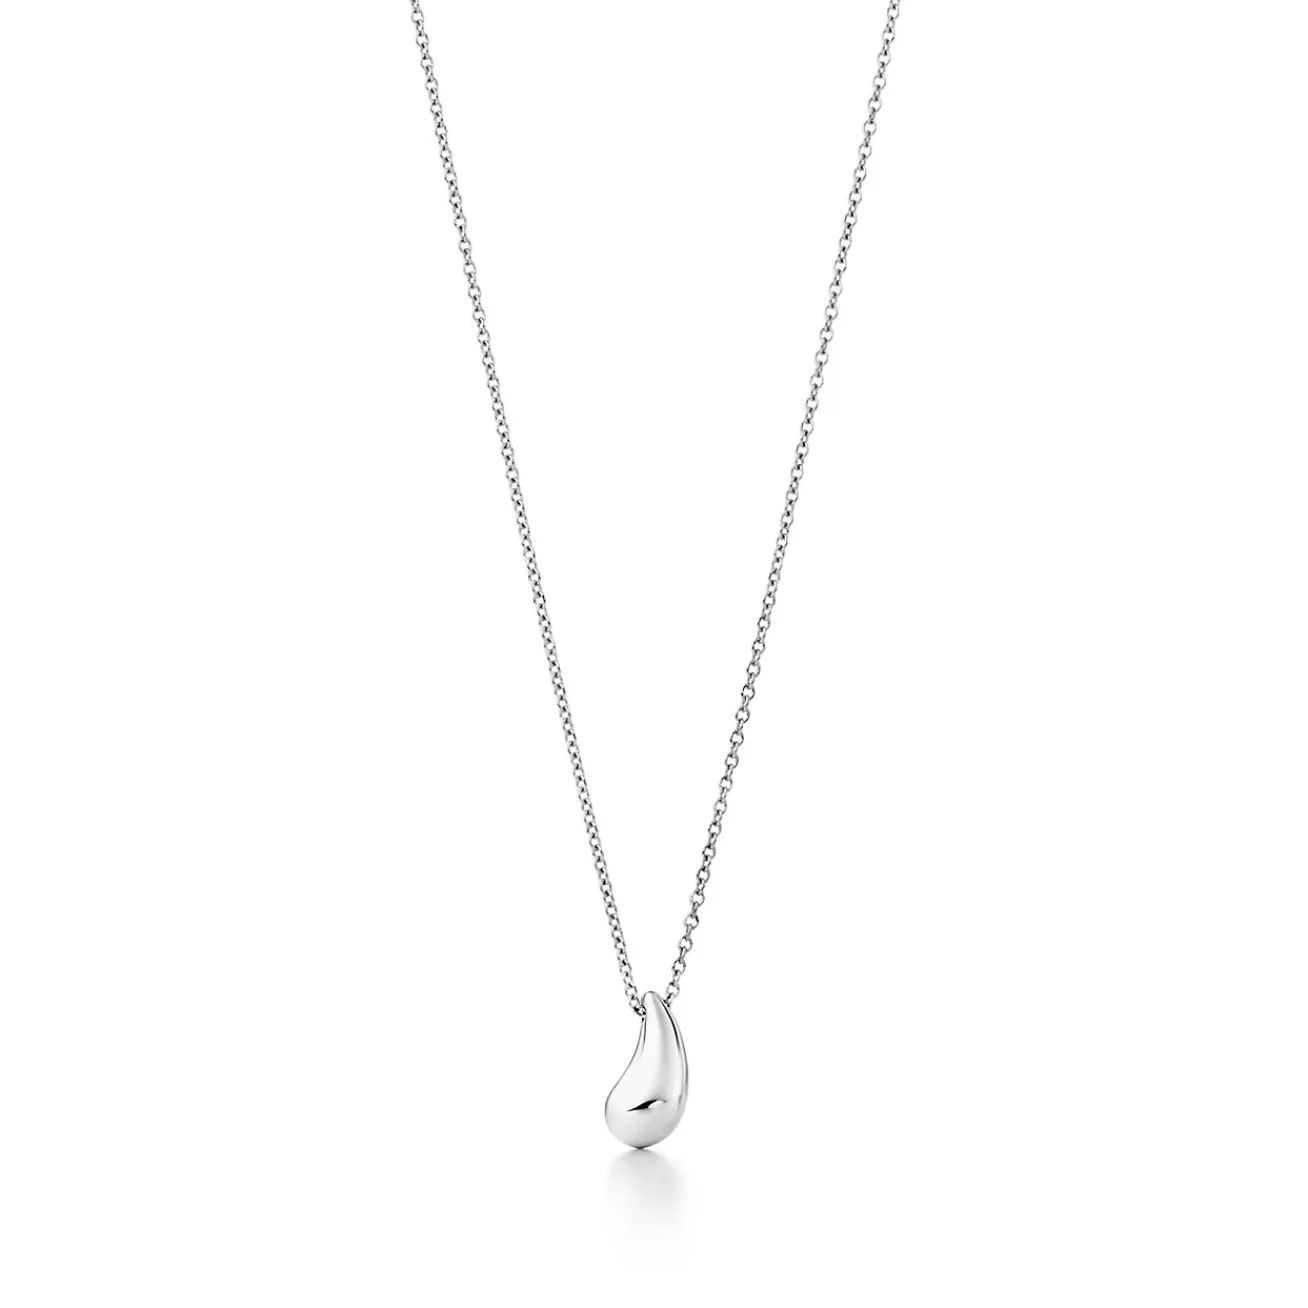 Tiffany & Co. Elsa Peretti® Teardrop pendant in sterling silver. | ^ Necklaces & Pendants | Gifts for Her